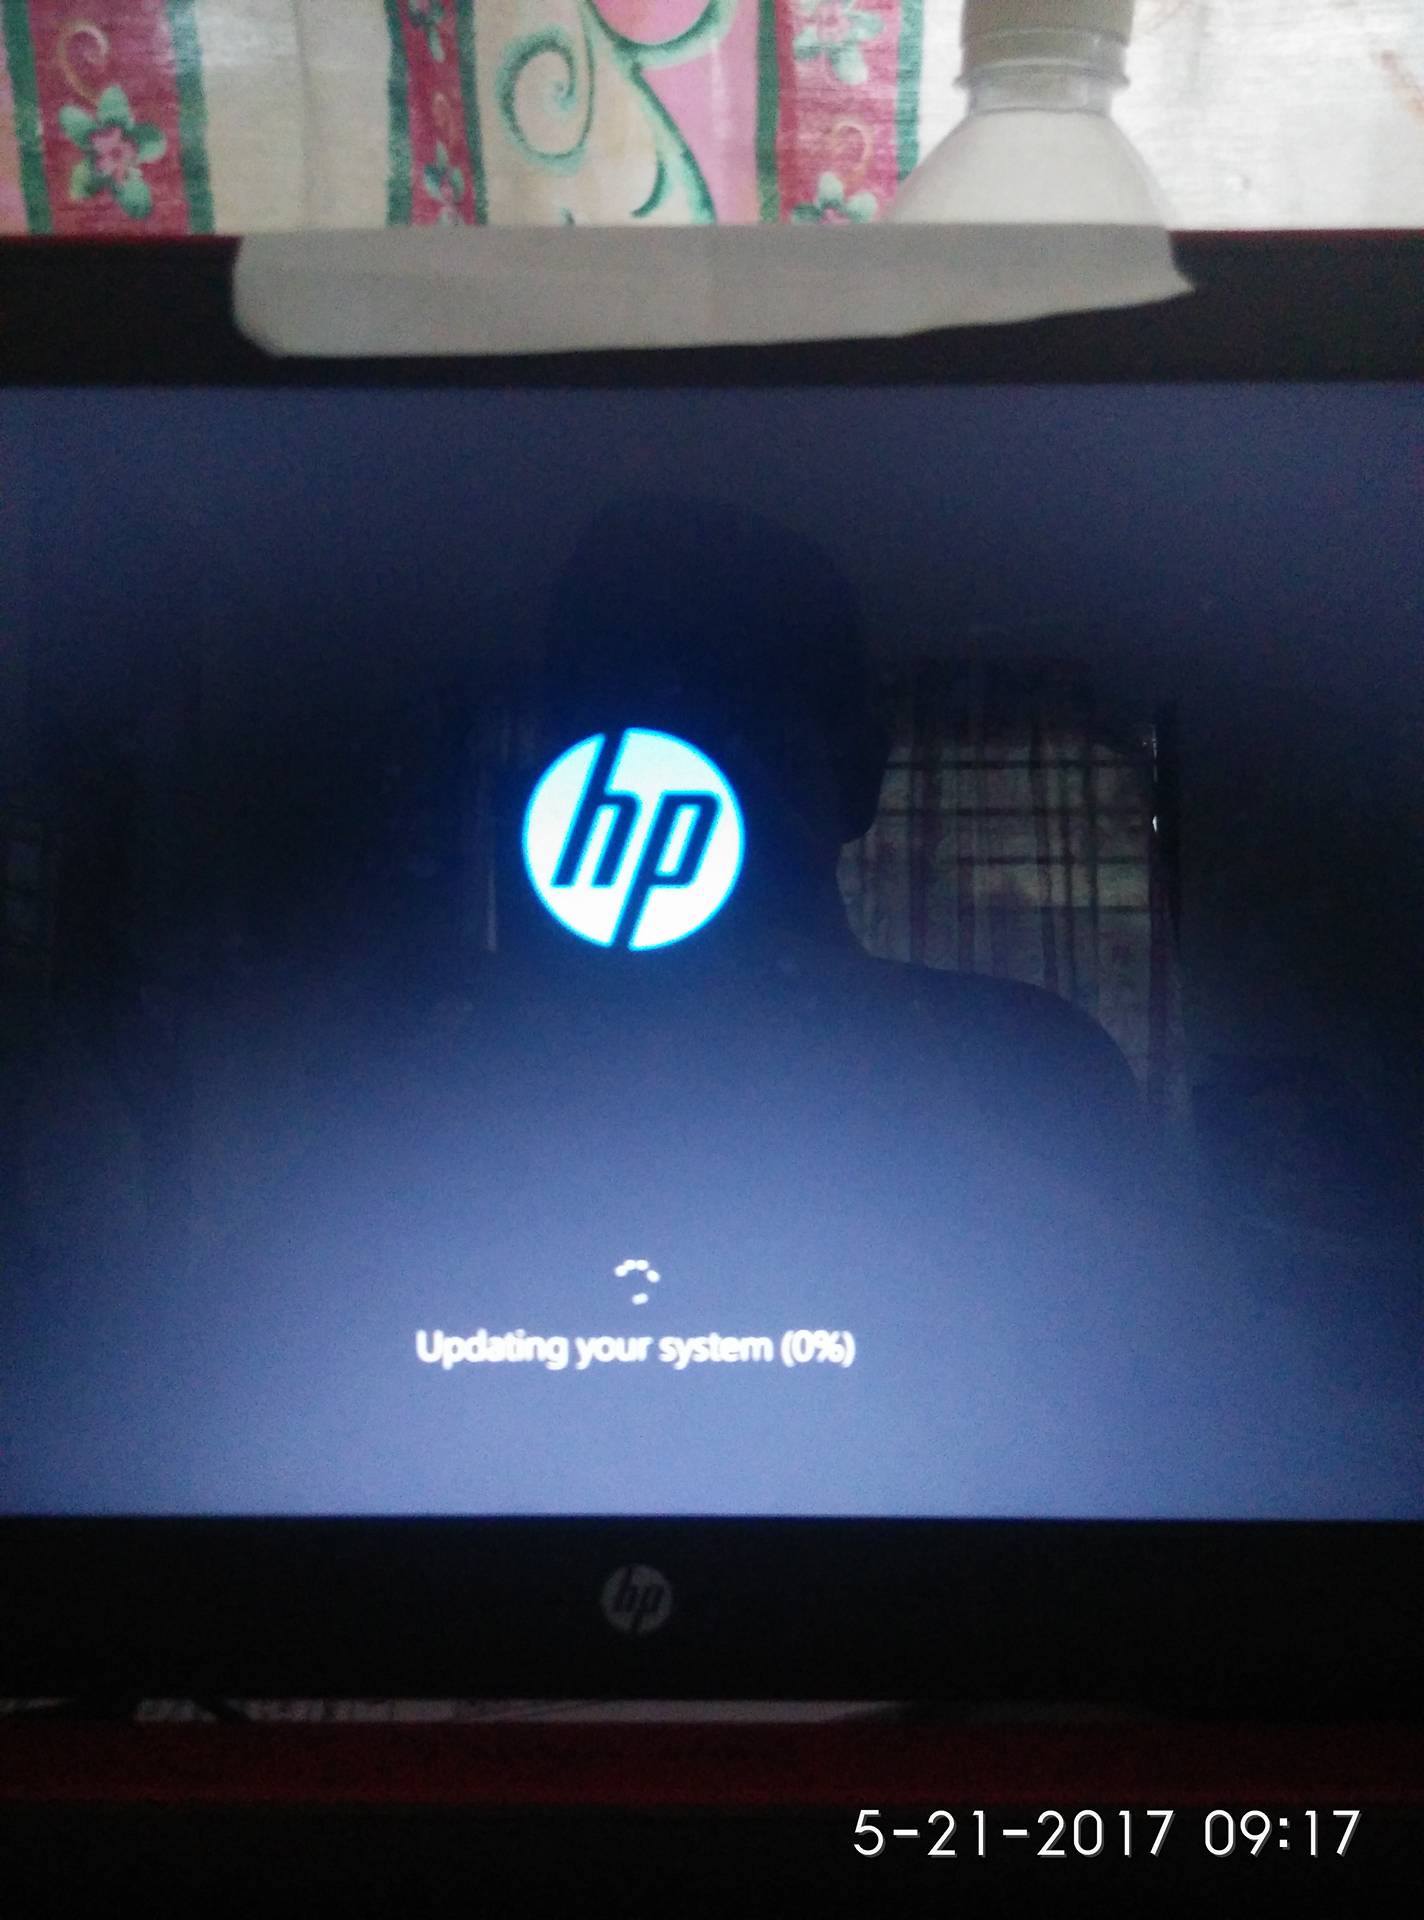 Hp computer updates share it pc download